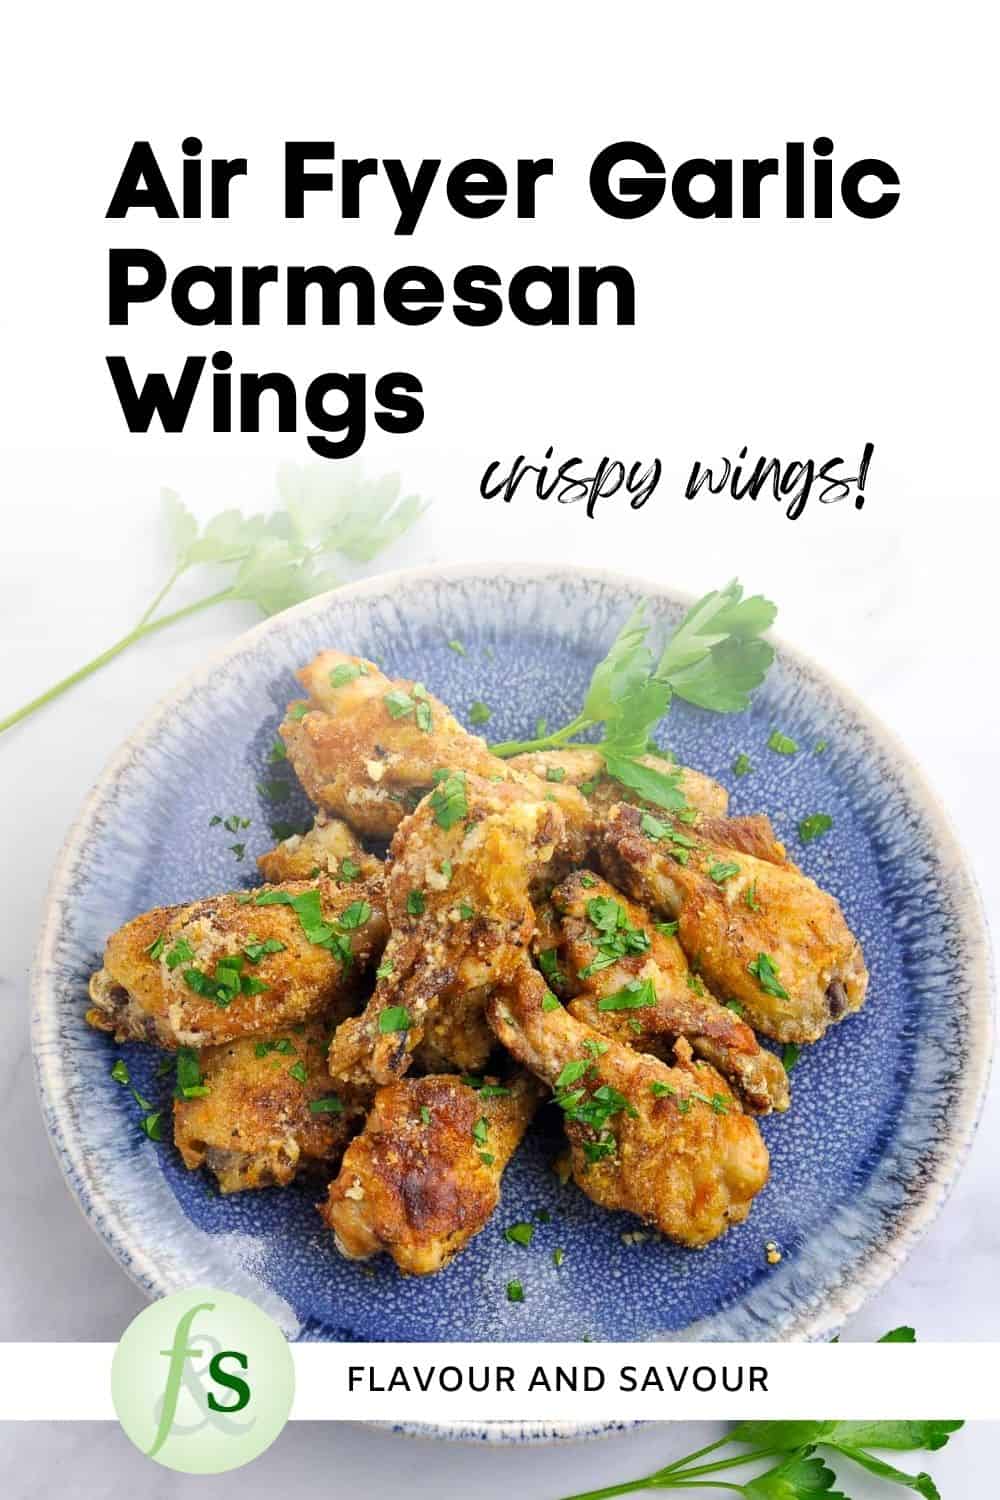 Image with text overlay for Air Fryer Garlic Parmesan Wings.